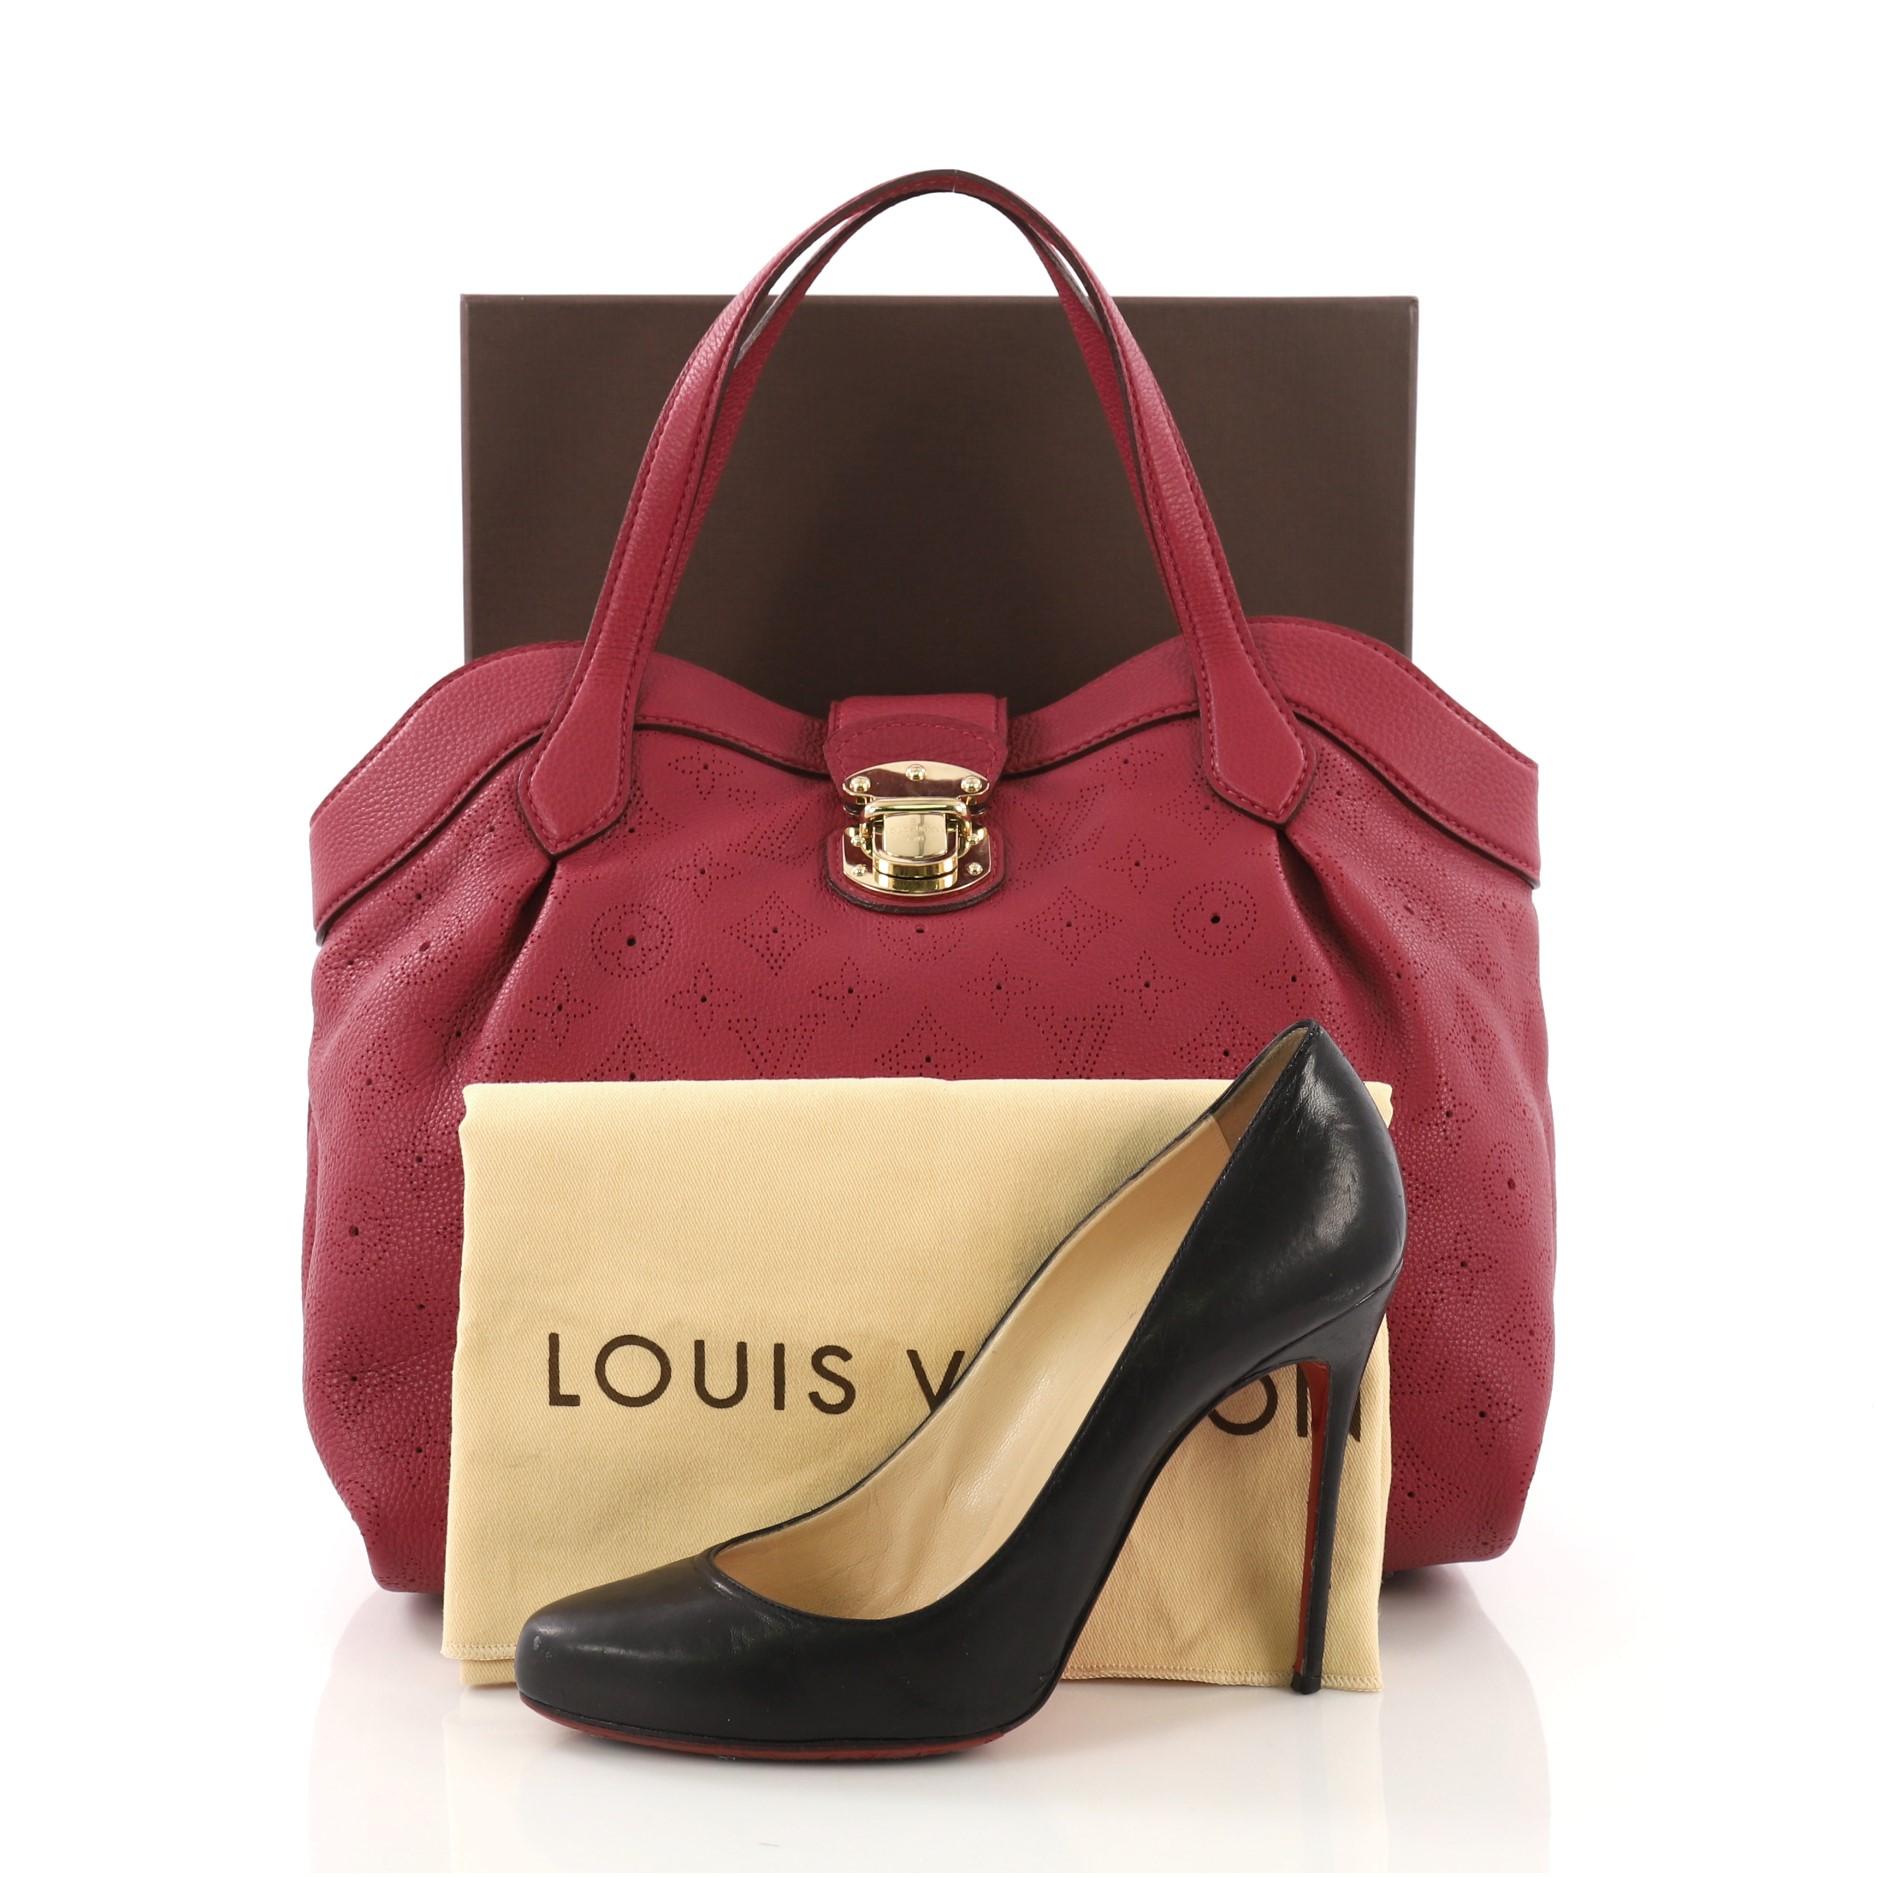 This Louis Vuitton Cirrus Handbag Mahina Leather PM, crafted from dark pink mahina leather, features dual flat leather handles, protective base studs, and gold-tone hardware. Its flap tab push-lock closure opens to a gray microfiber interior with